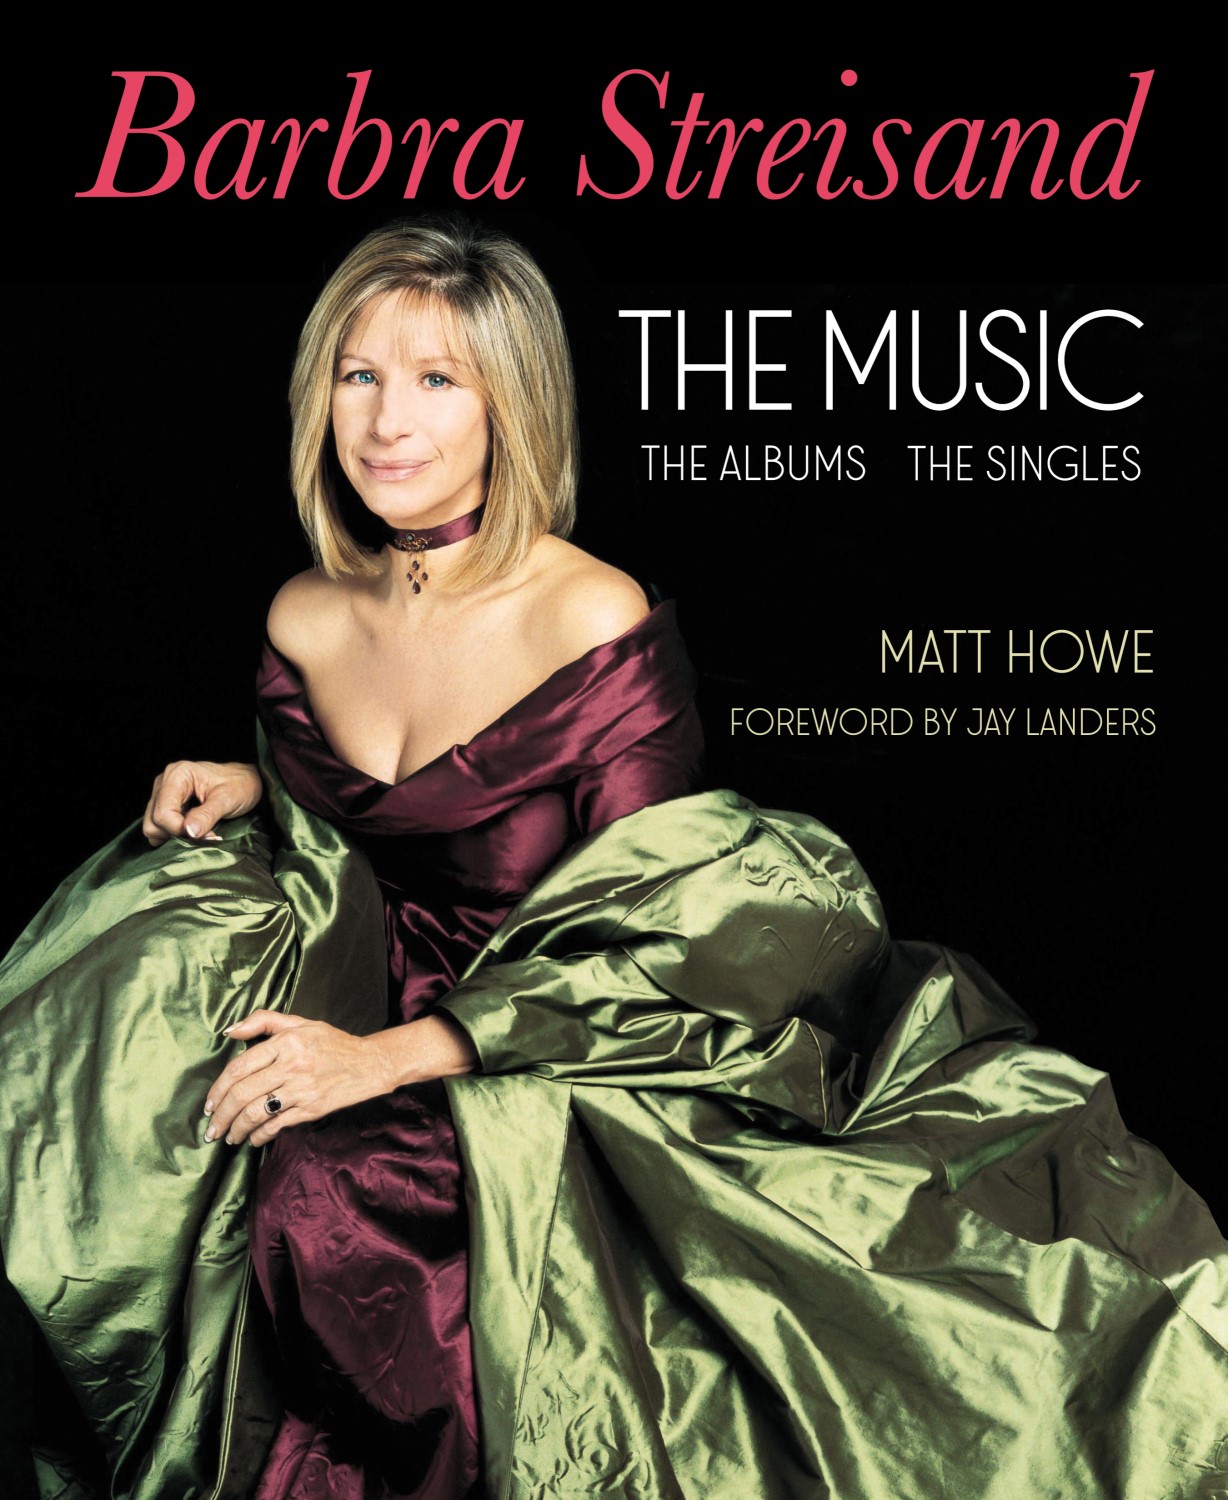 Barbra Streisand The Music The Albums The Singles Library Journal